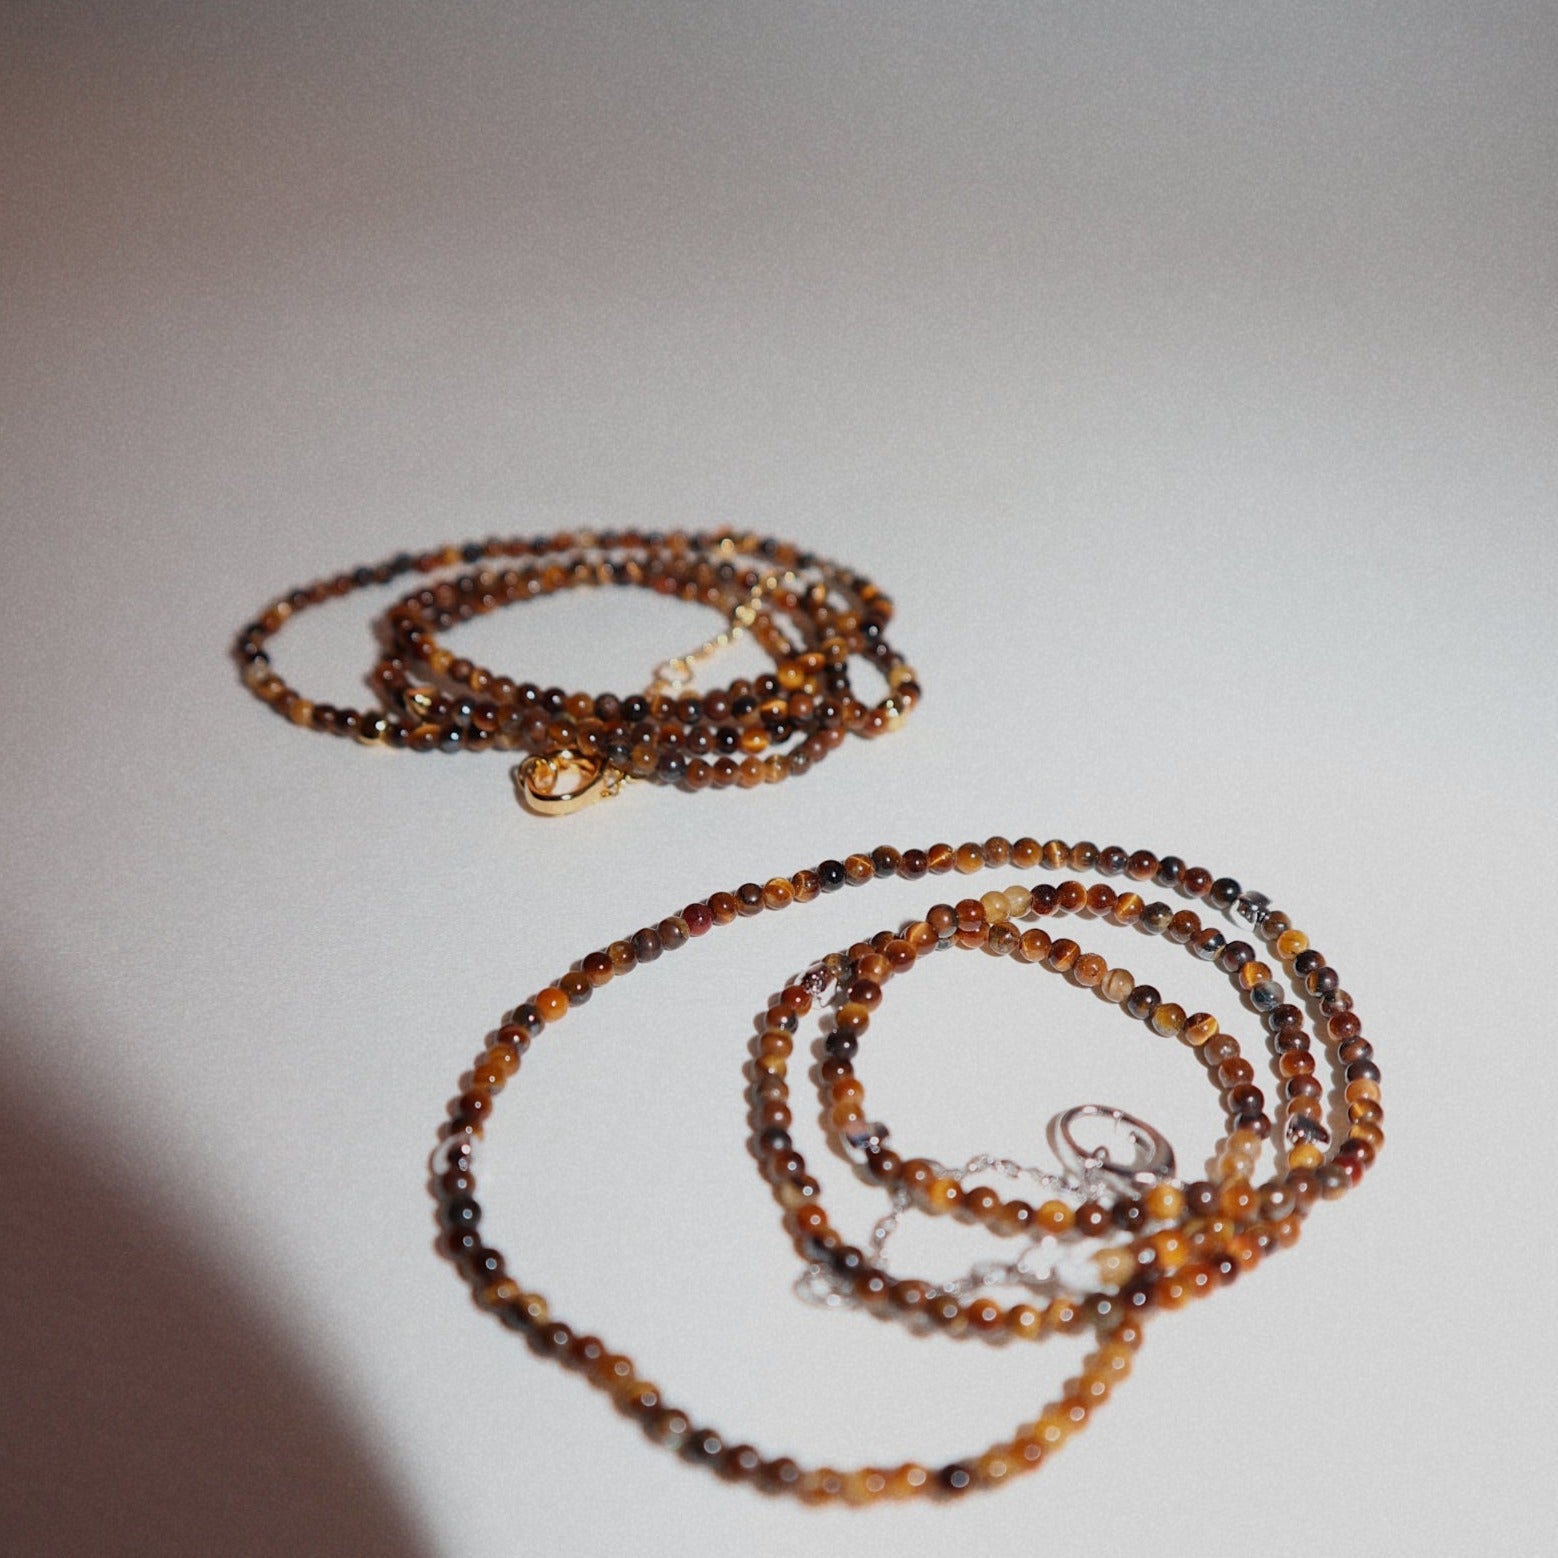 'Tate' Tiger's Eye Beaded Necklace - Lines & Current